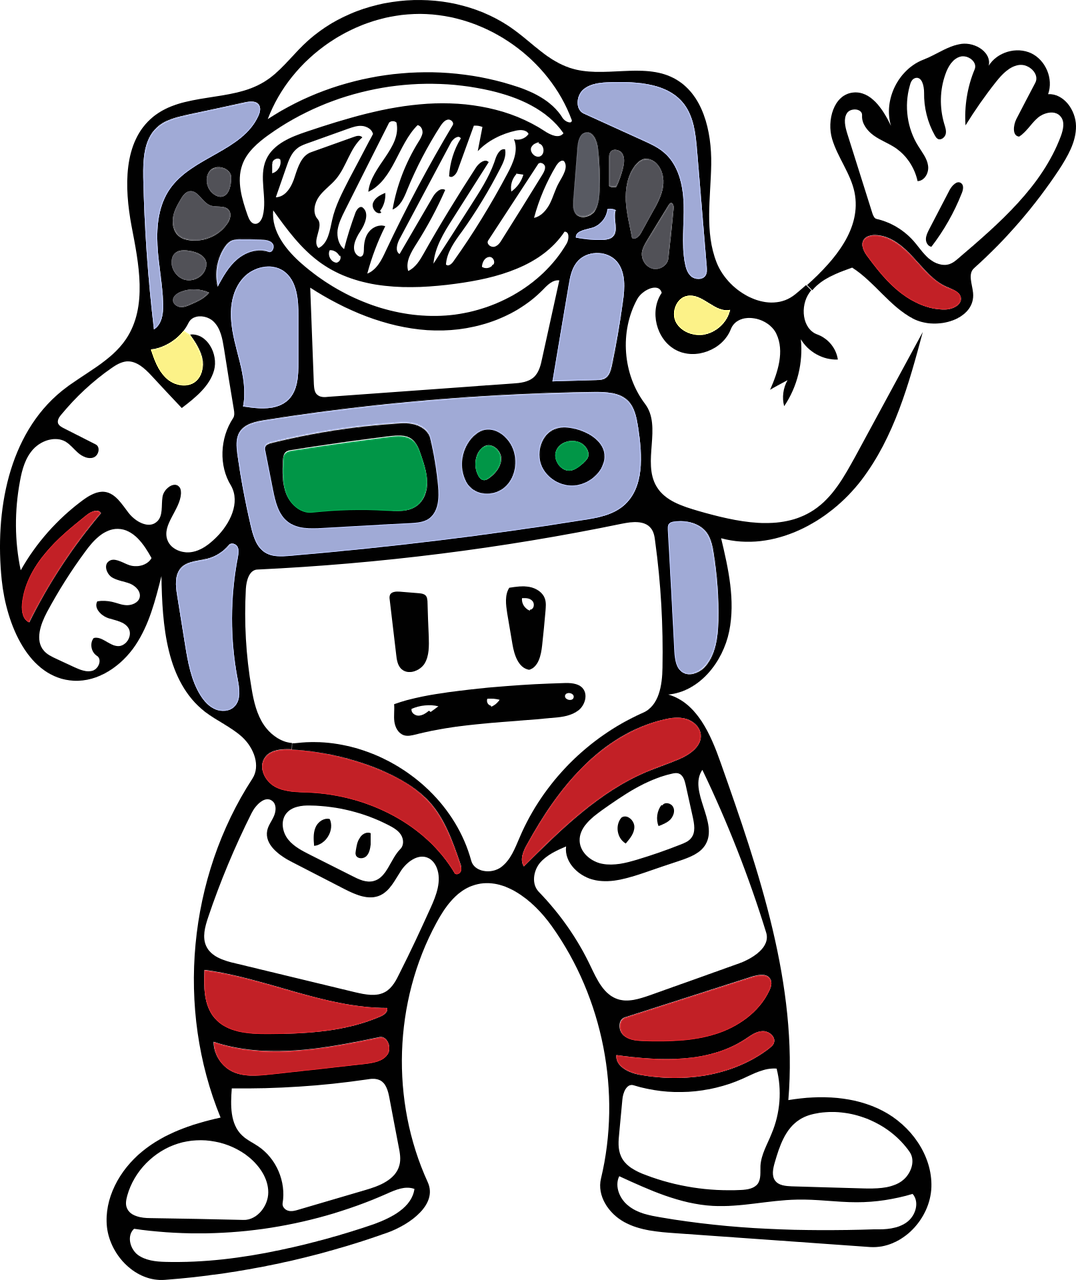 a drawing of a robot on a black background, buzz lightyear, harness, it has a red and black paint, backlight body